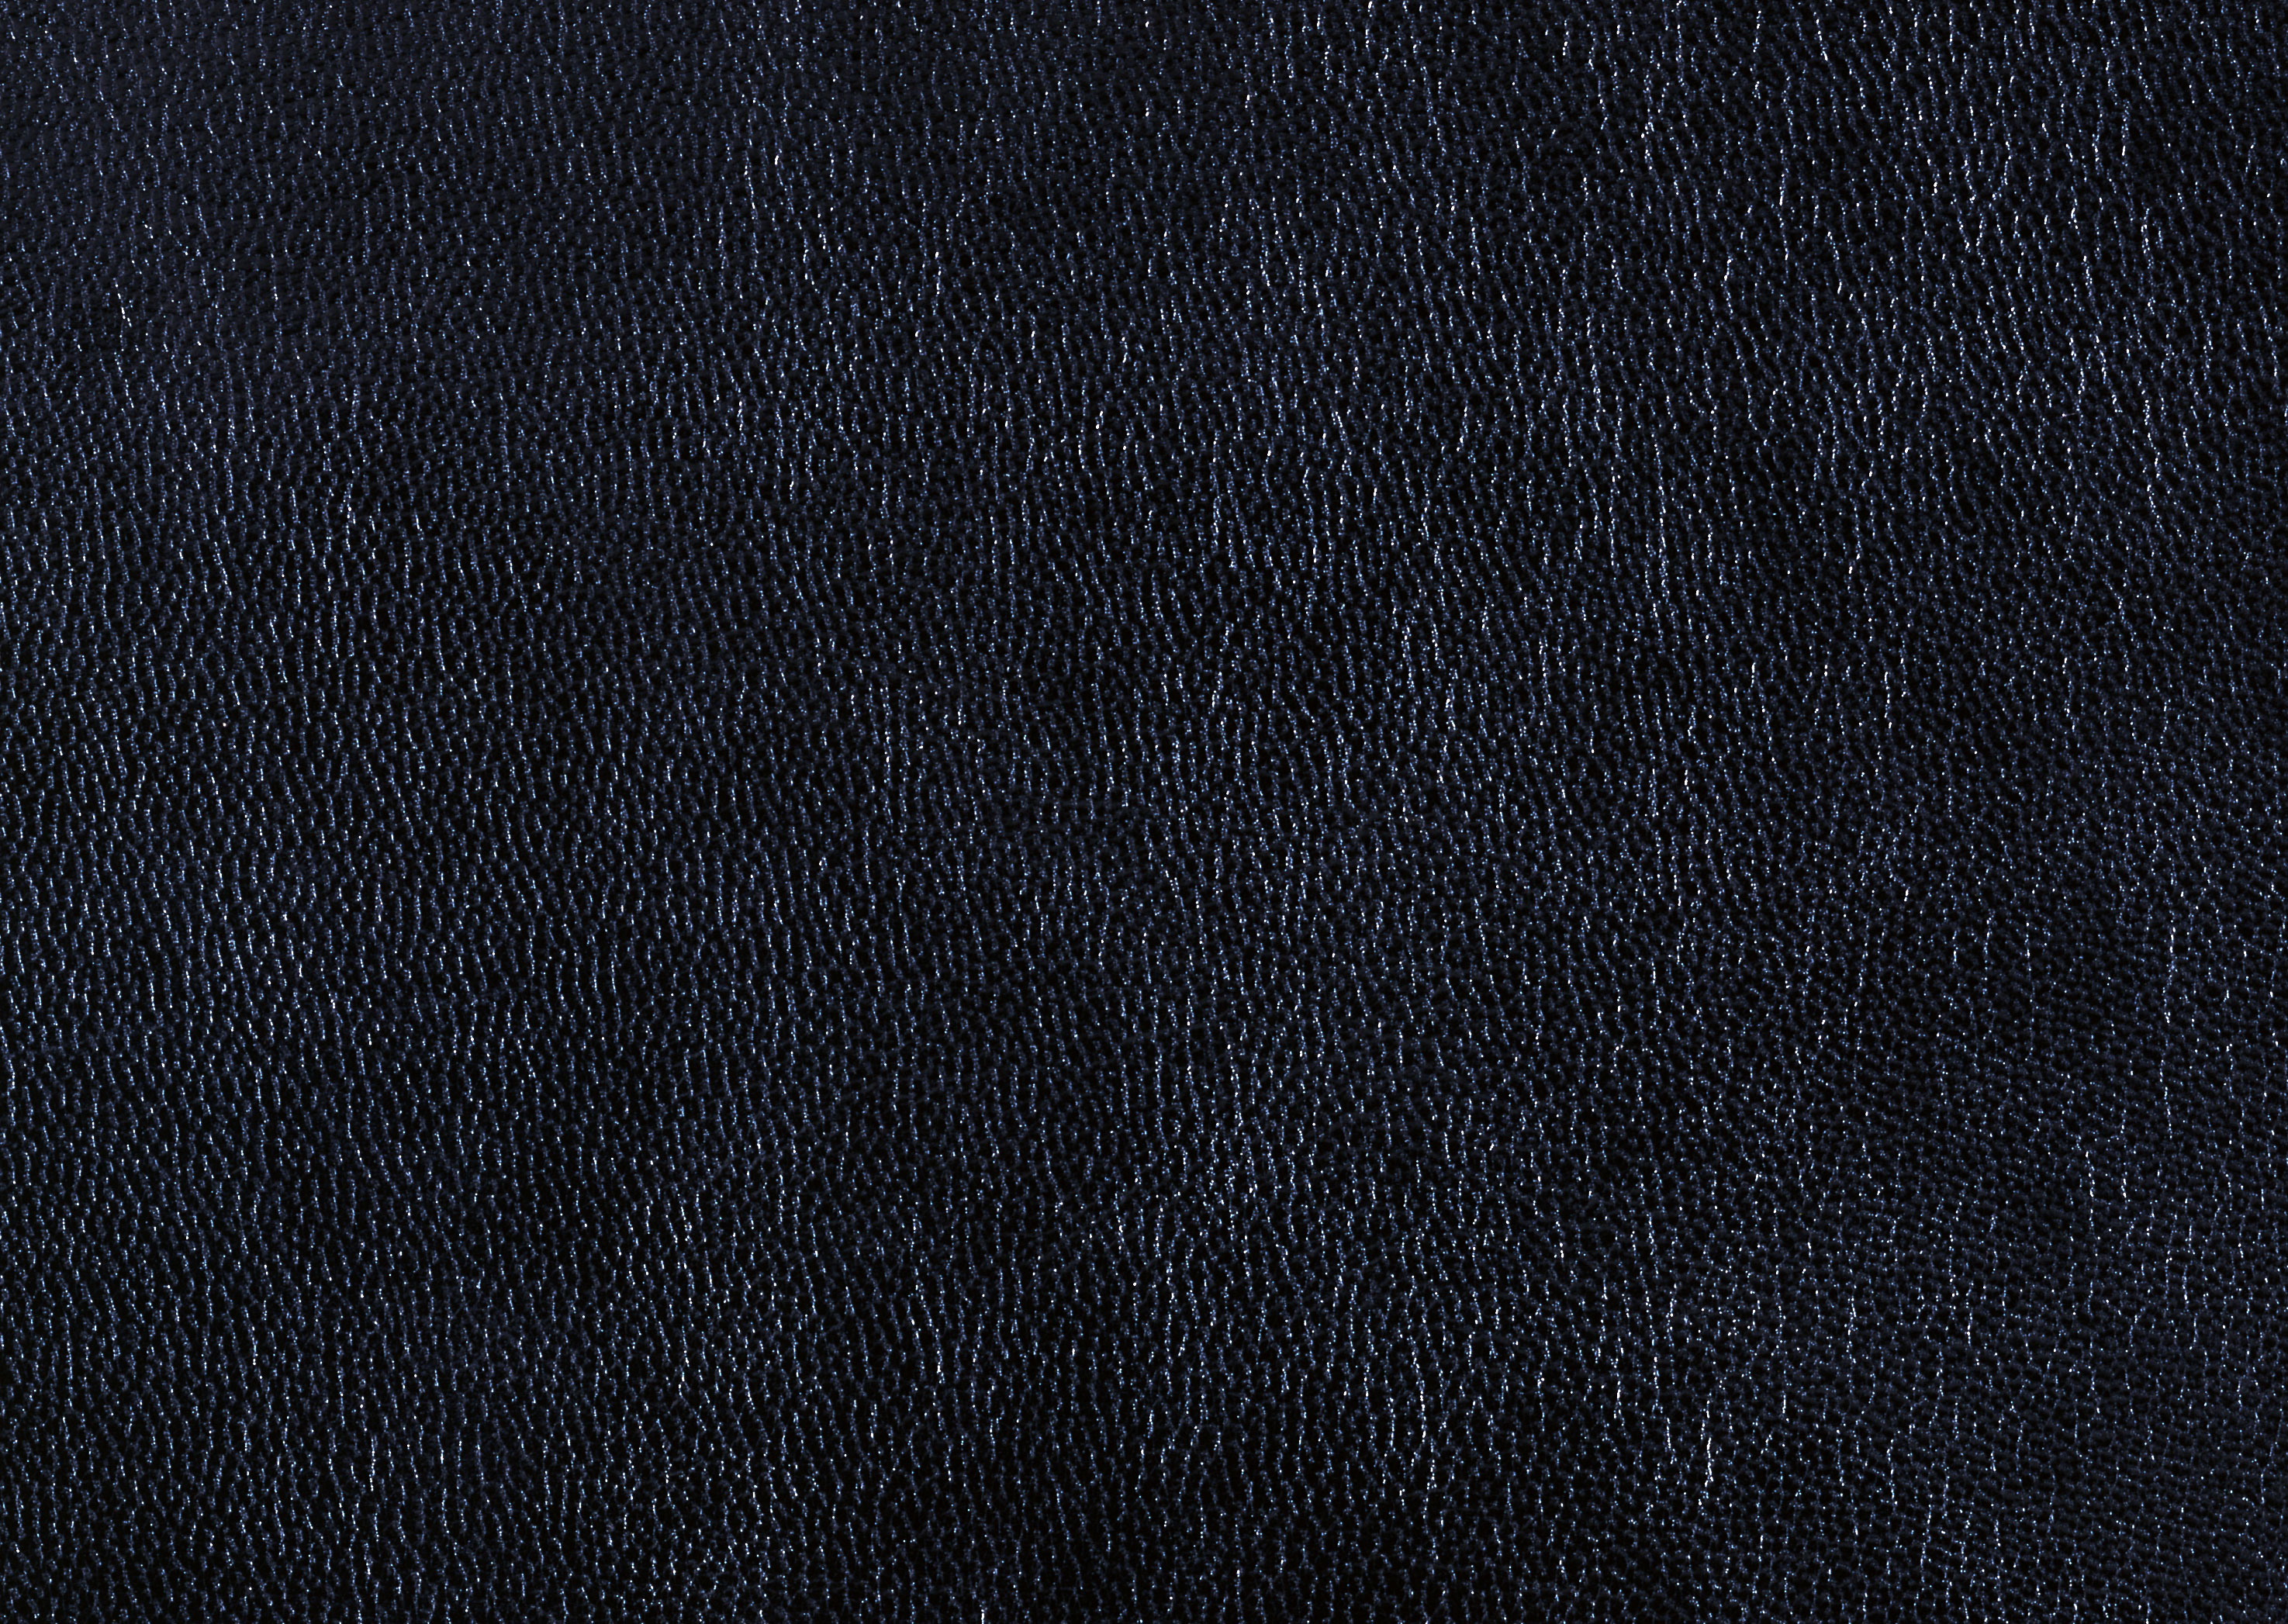 Black leather texture background image free download